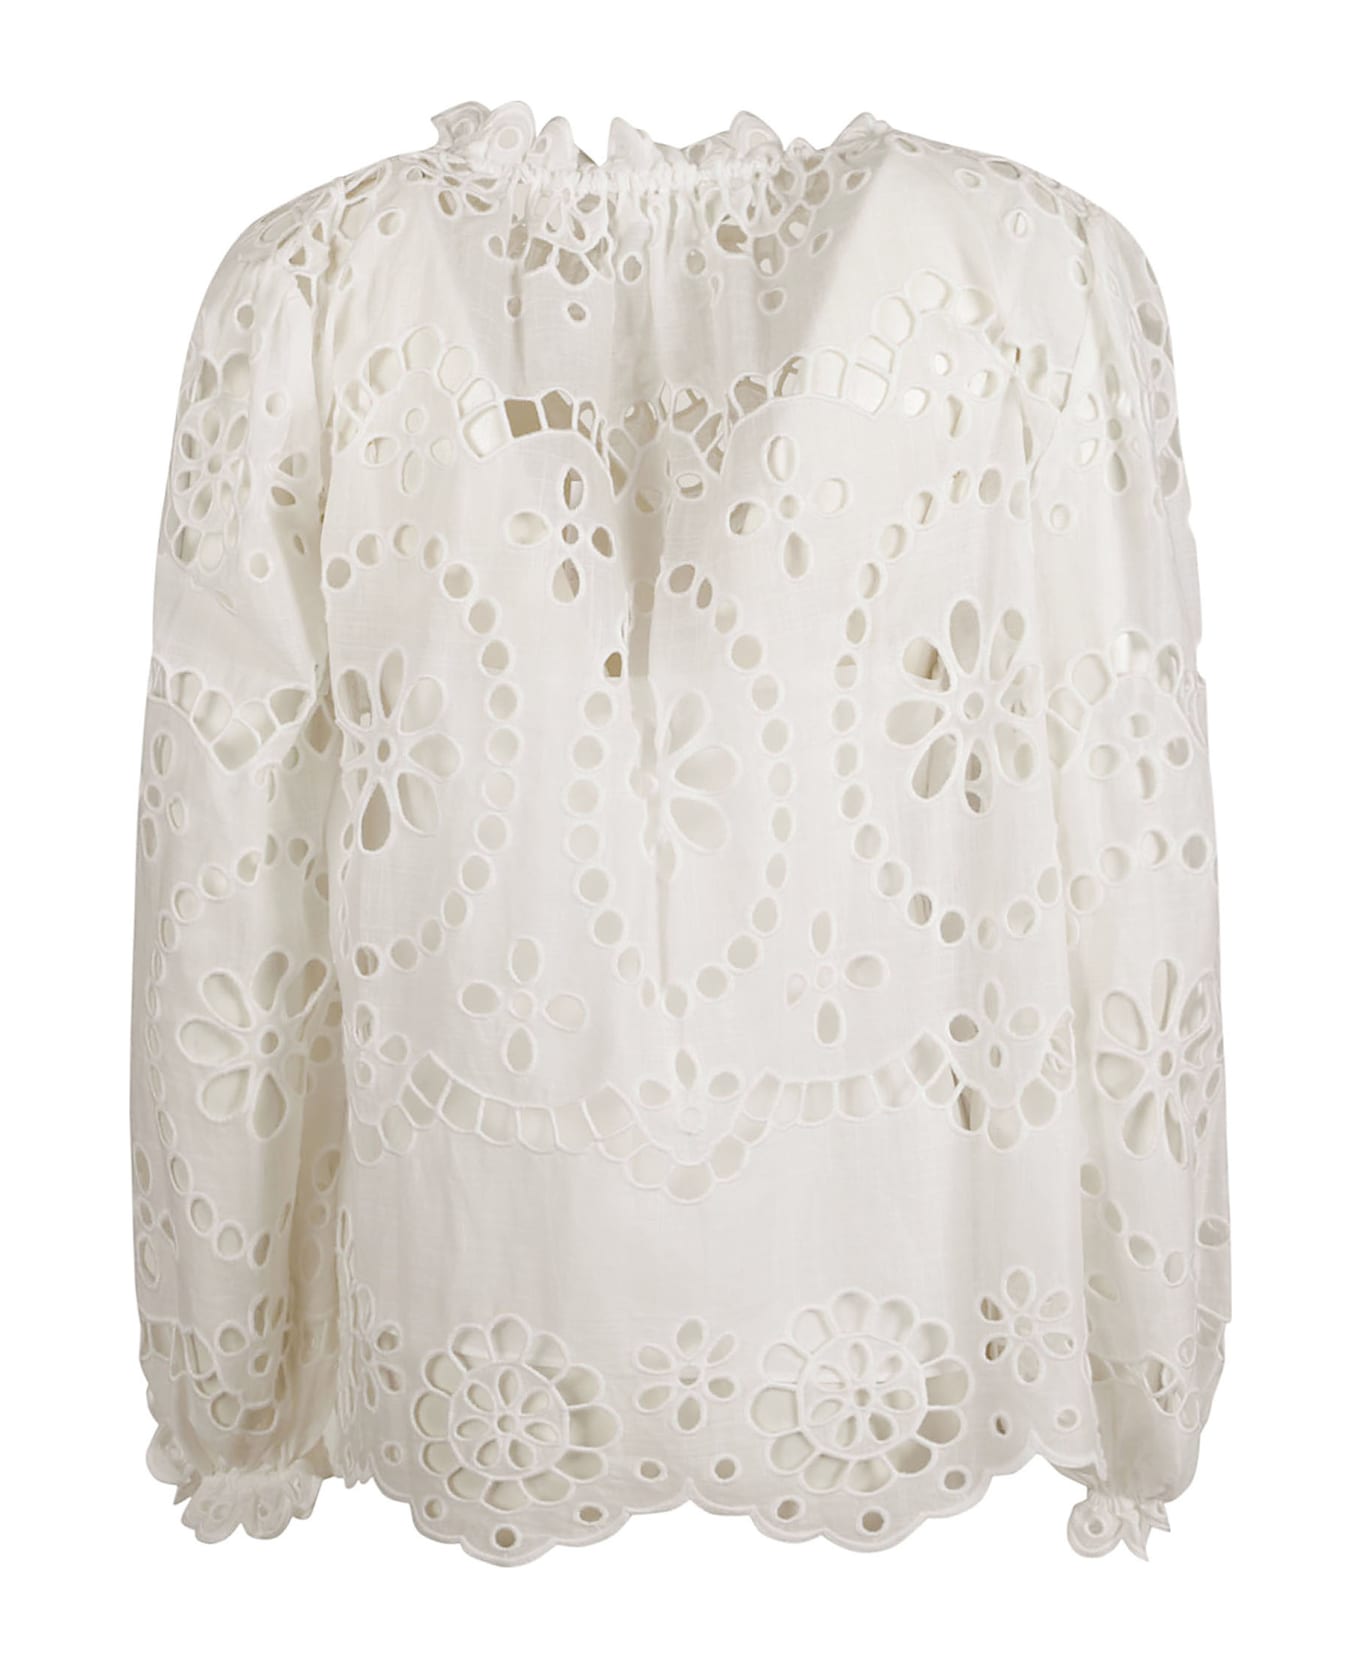 Zimmermann Lexi Embroidered Blouse - Bianco